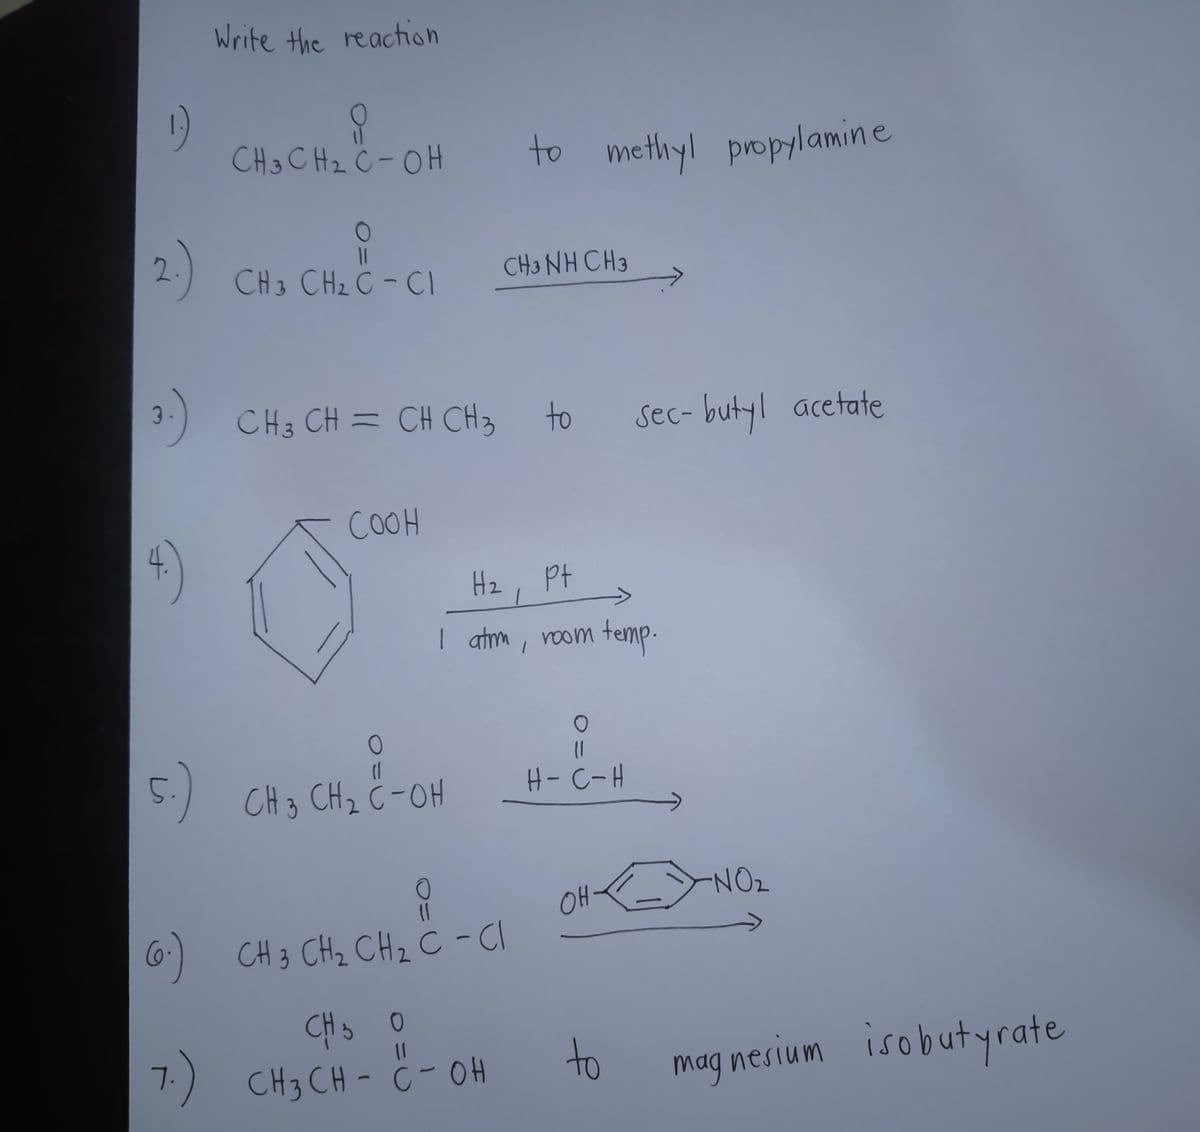 Write the reaction
1)
CH3 CHz Ċ -OH
to methyl propylamine
CH3 CH2 C - CI
CH3 NH CH3
3-) CH3 CH = CH CH3
to
Sec- butyl acetate
COOH
4)
Hz
Pt
| atm, room temp-
5:)
CH3 CHz C-OH
H- C-H
NO2
OH
6)
CH 3 CHz CHz C -CI
CH3 0
7.) CH3 CH - ċ- OH
11
to
mag nesium isobutyrate
